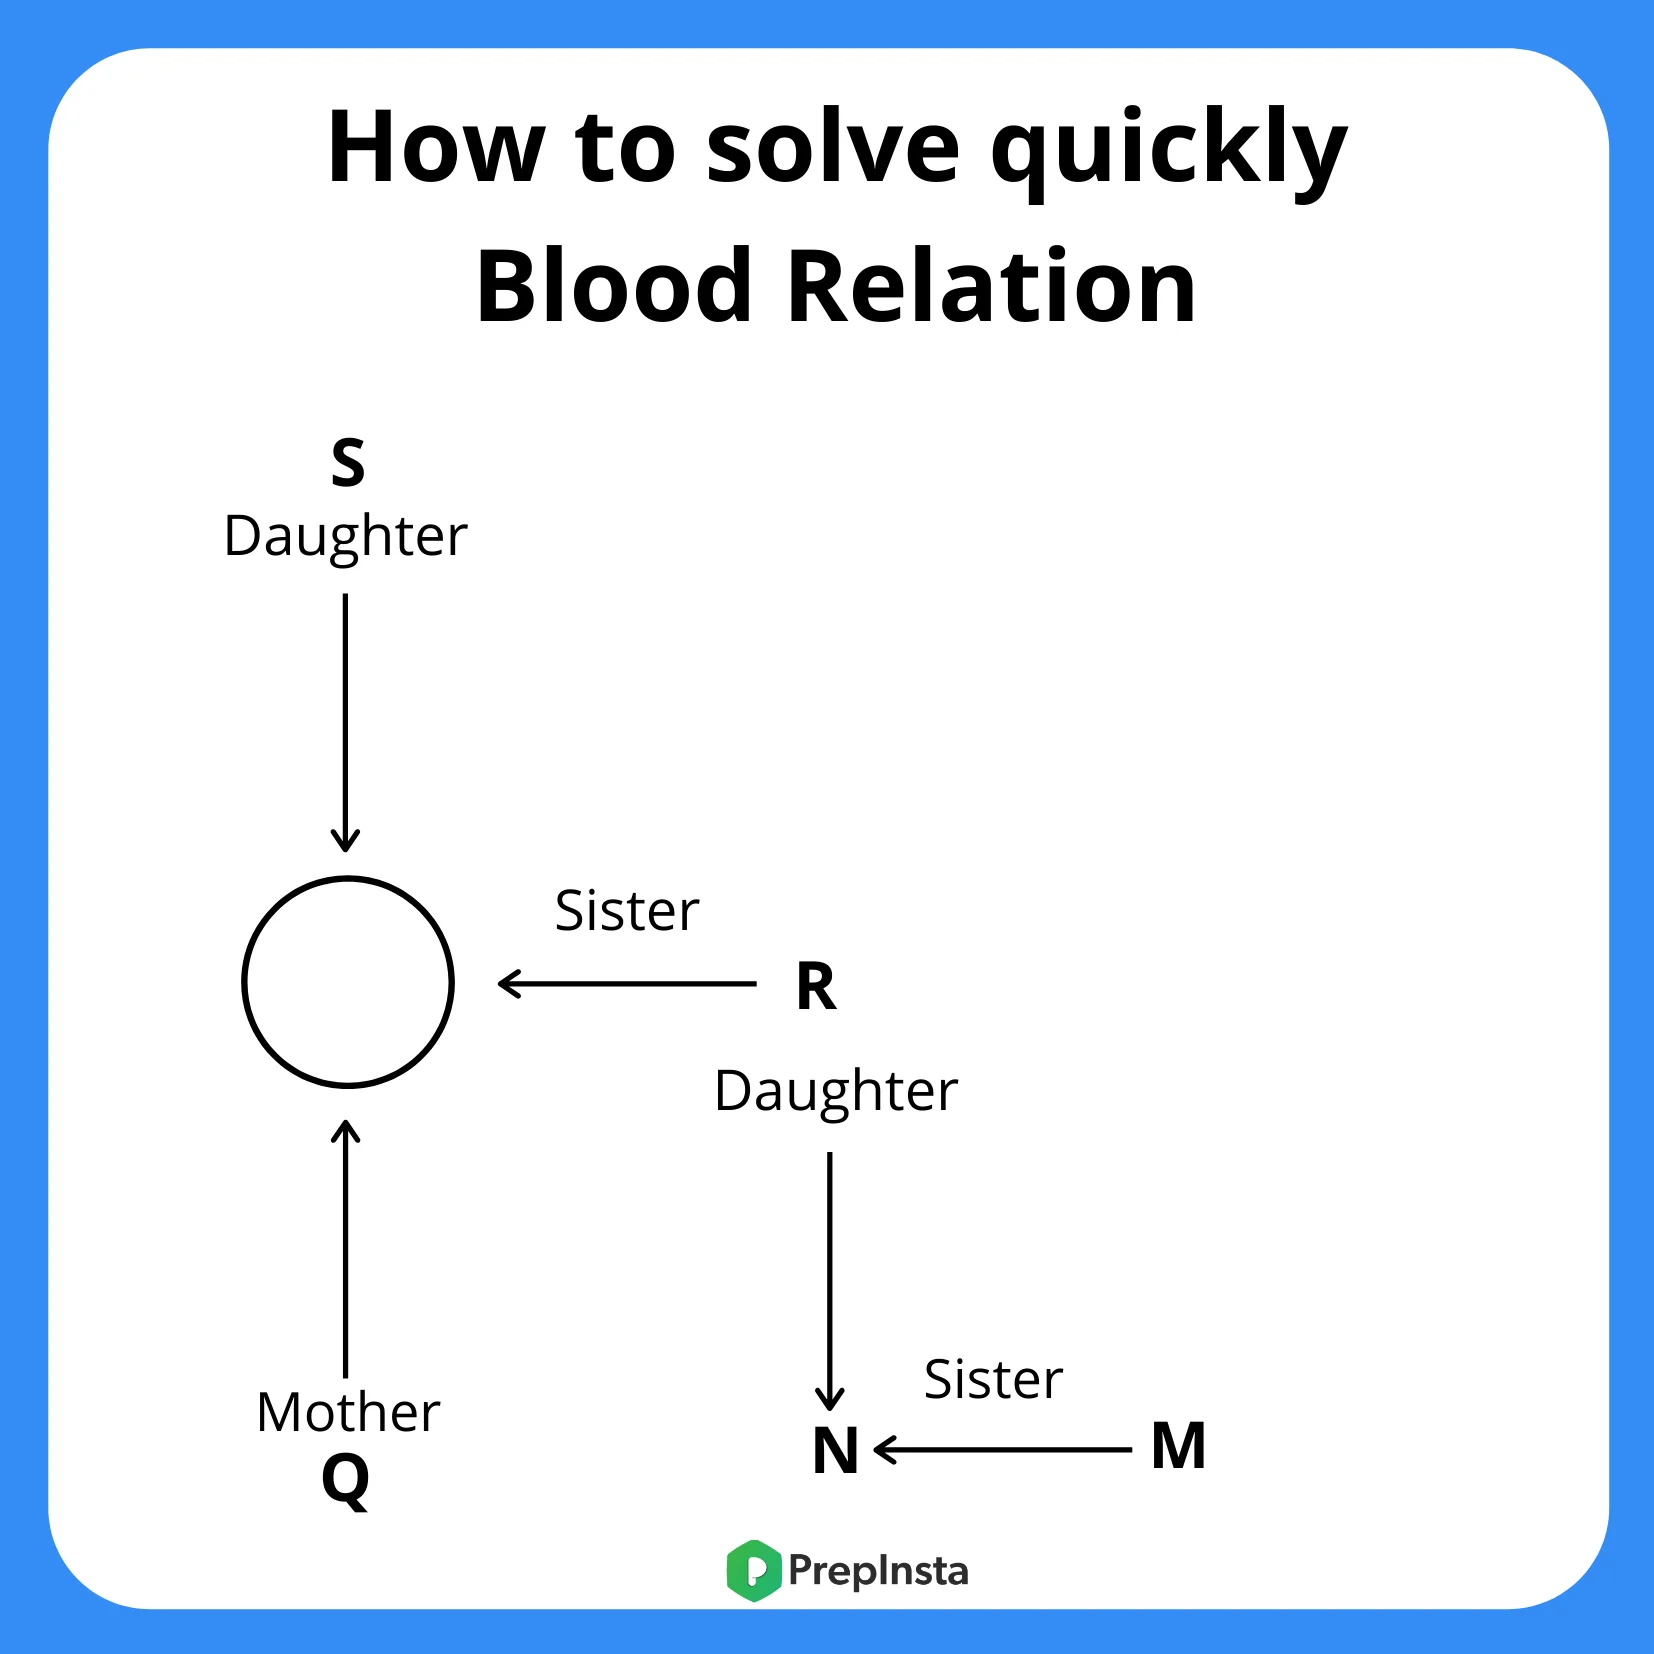 How To Solve Blood Relation Questions Quickly